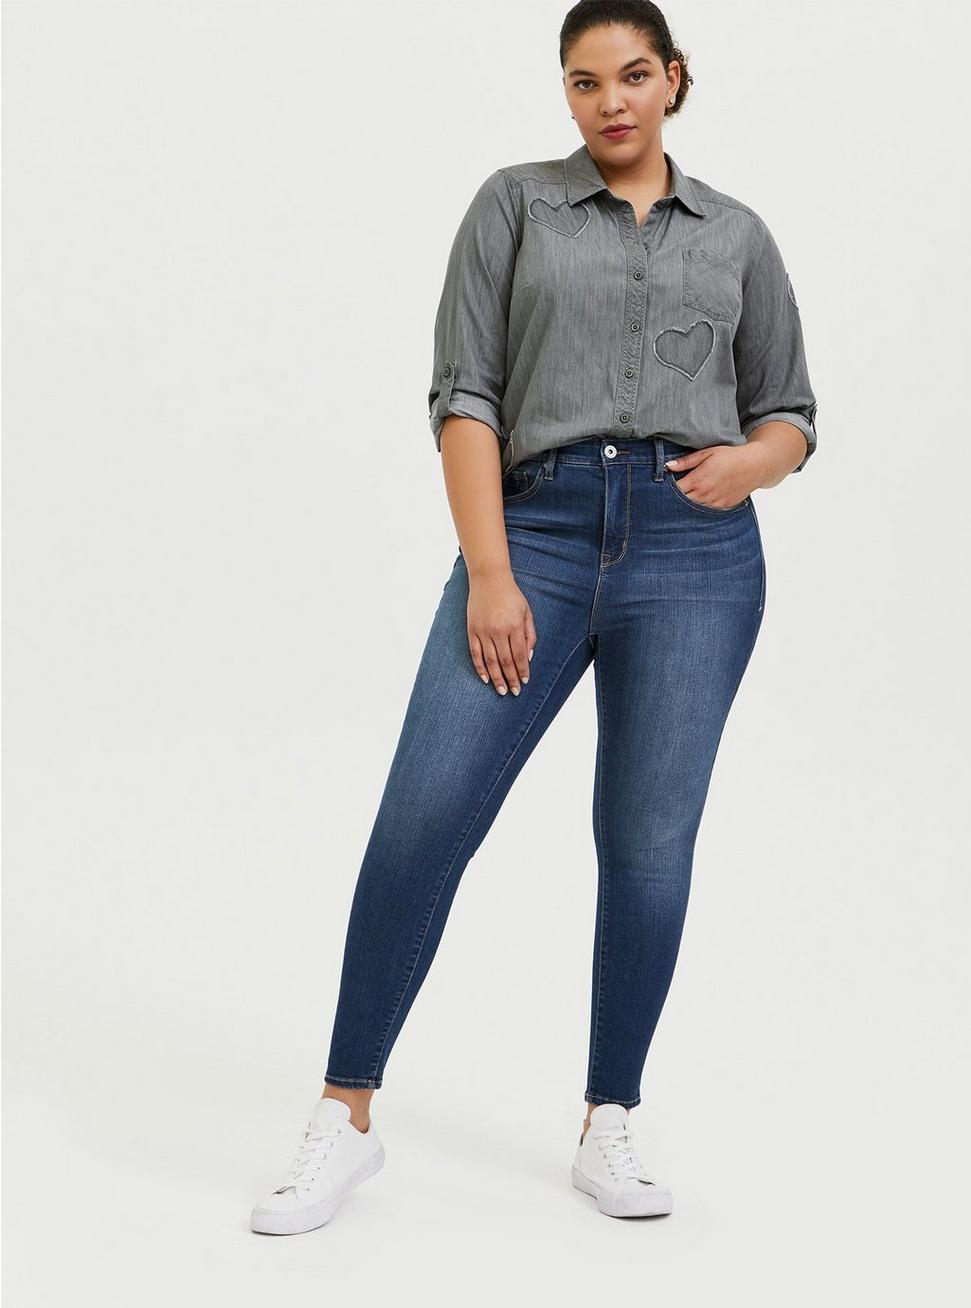 Plus Size - Taylor - Dark Grey Denim Heart Button Front Relaxed Fit ...